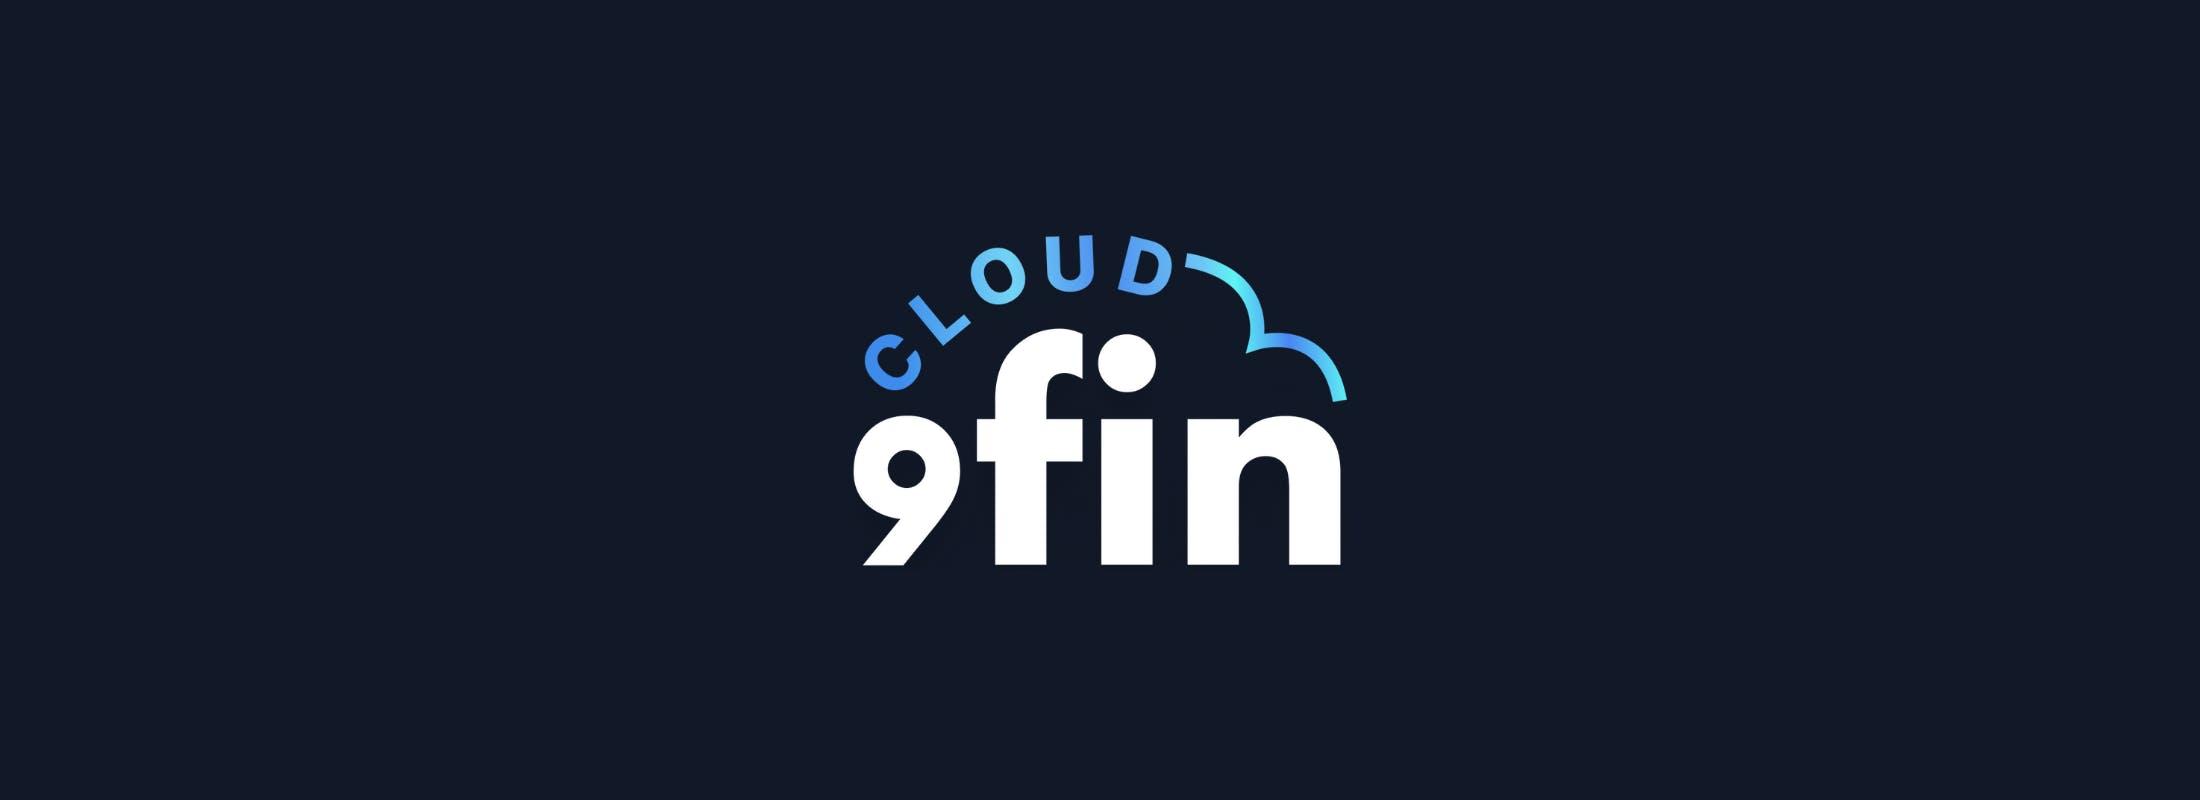 Cloud 9fin — Talking SaaS with Thoma Bravo, featuring Oliver Thym